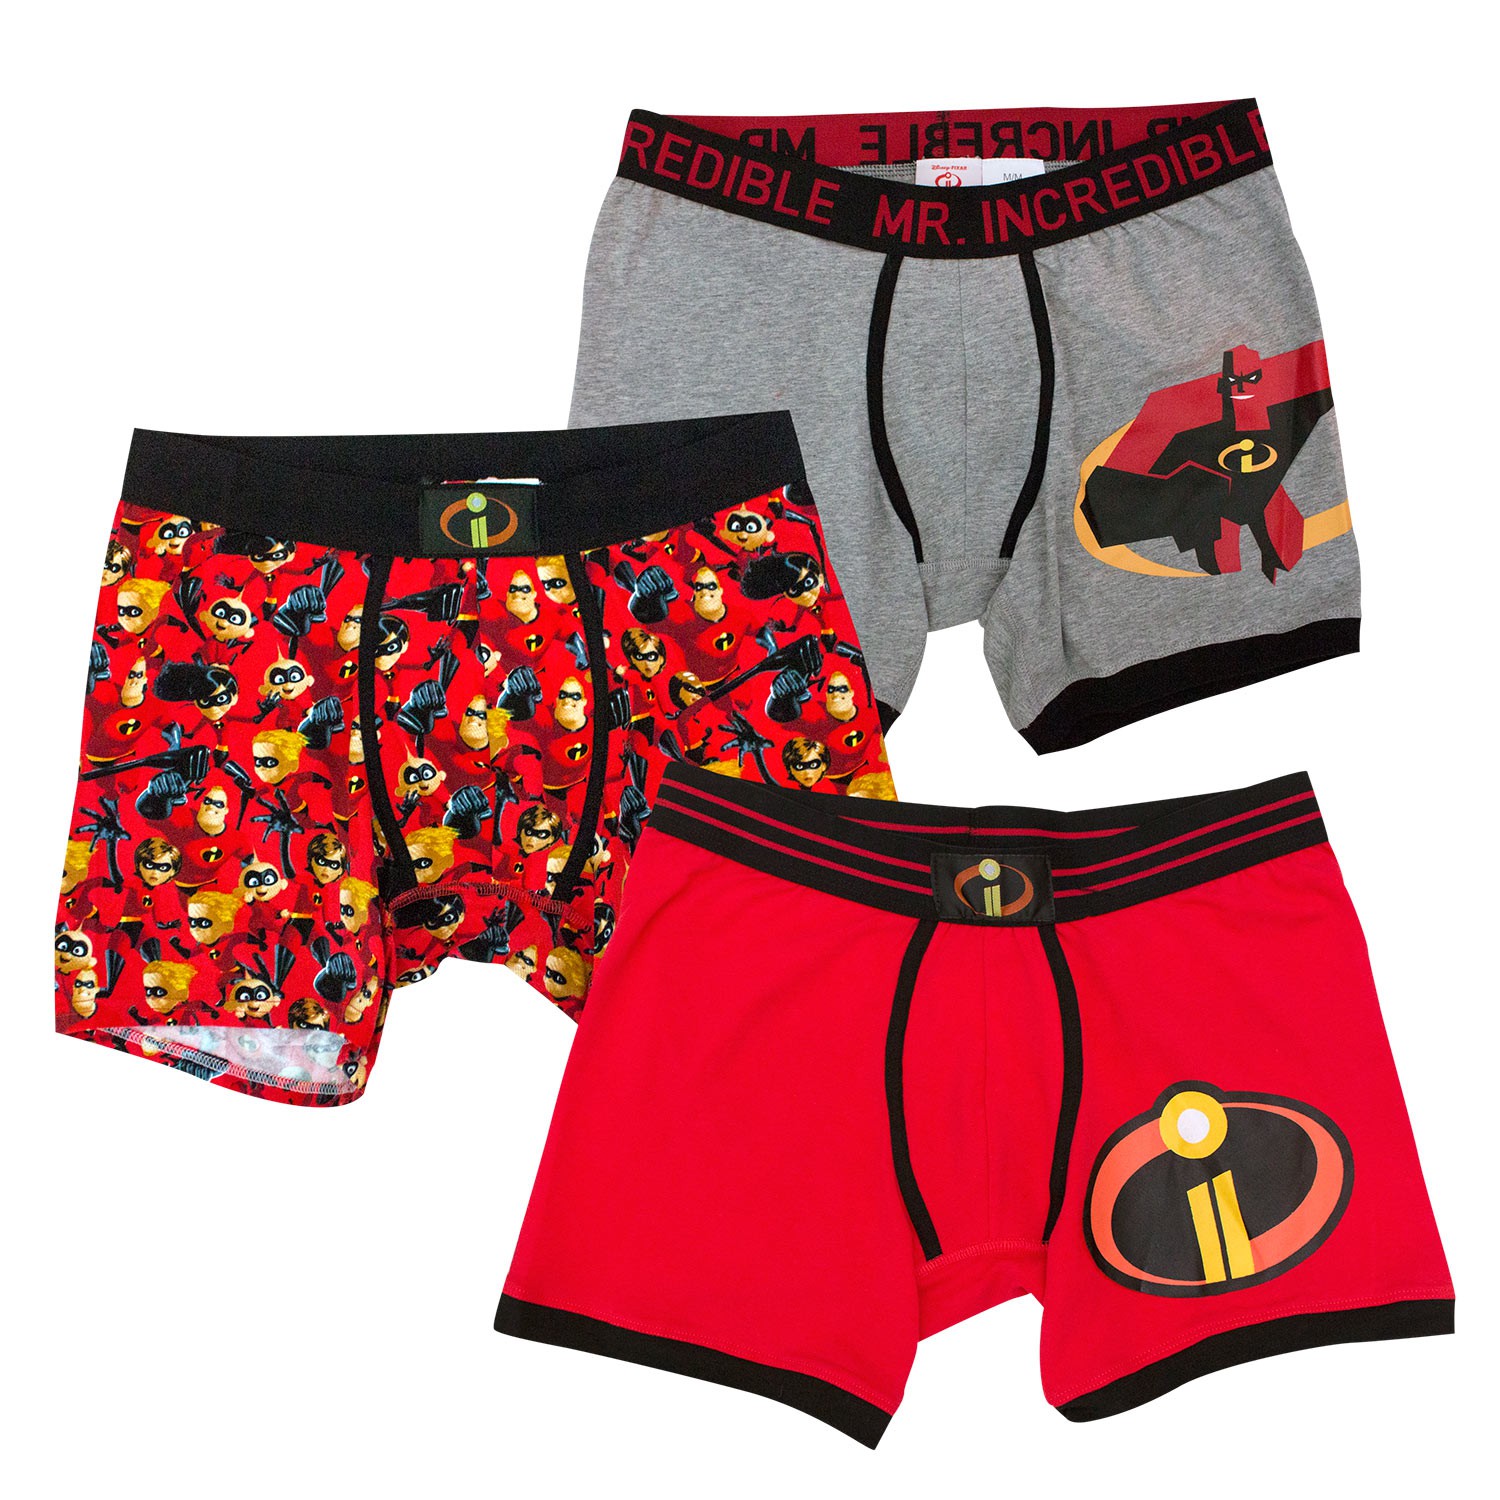 The Incredibles 2 Mr. Incredible Boxer Brief Set of 3